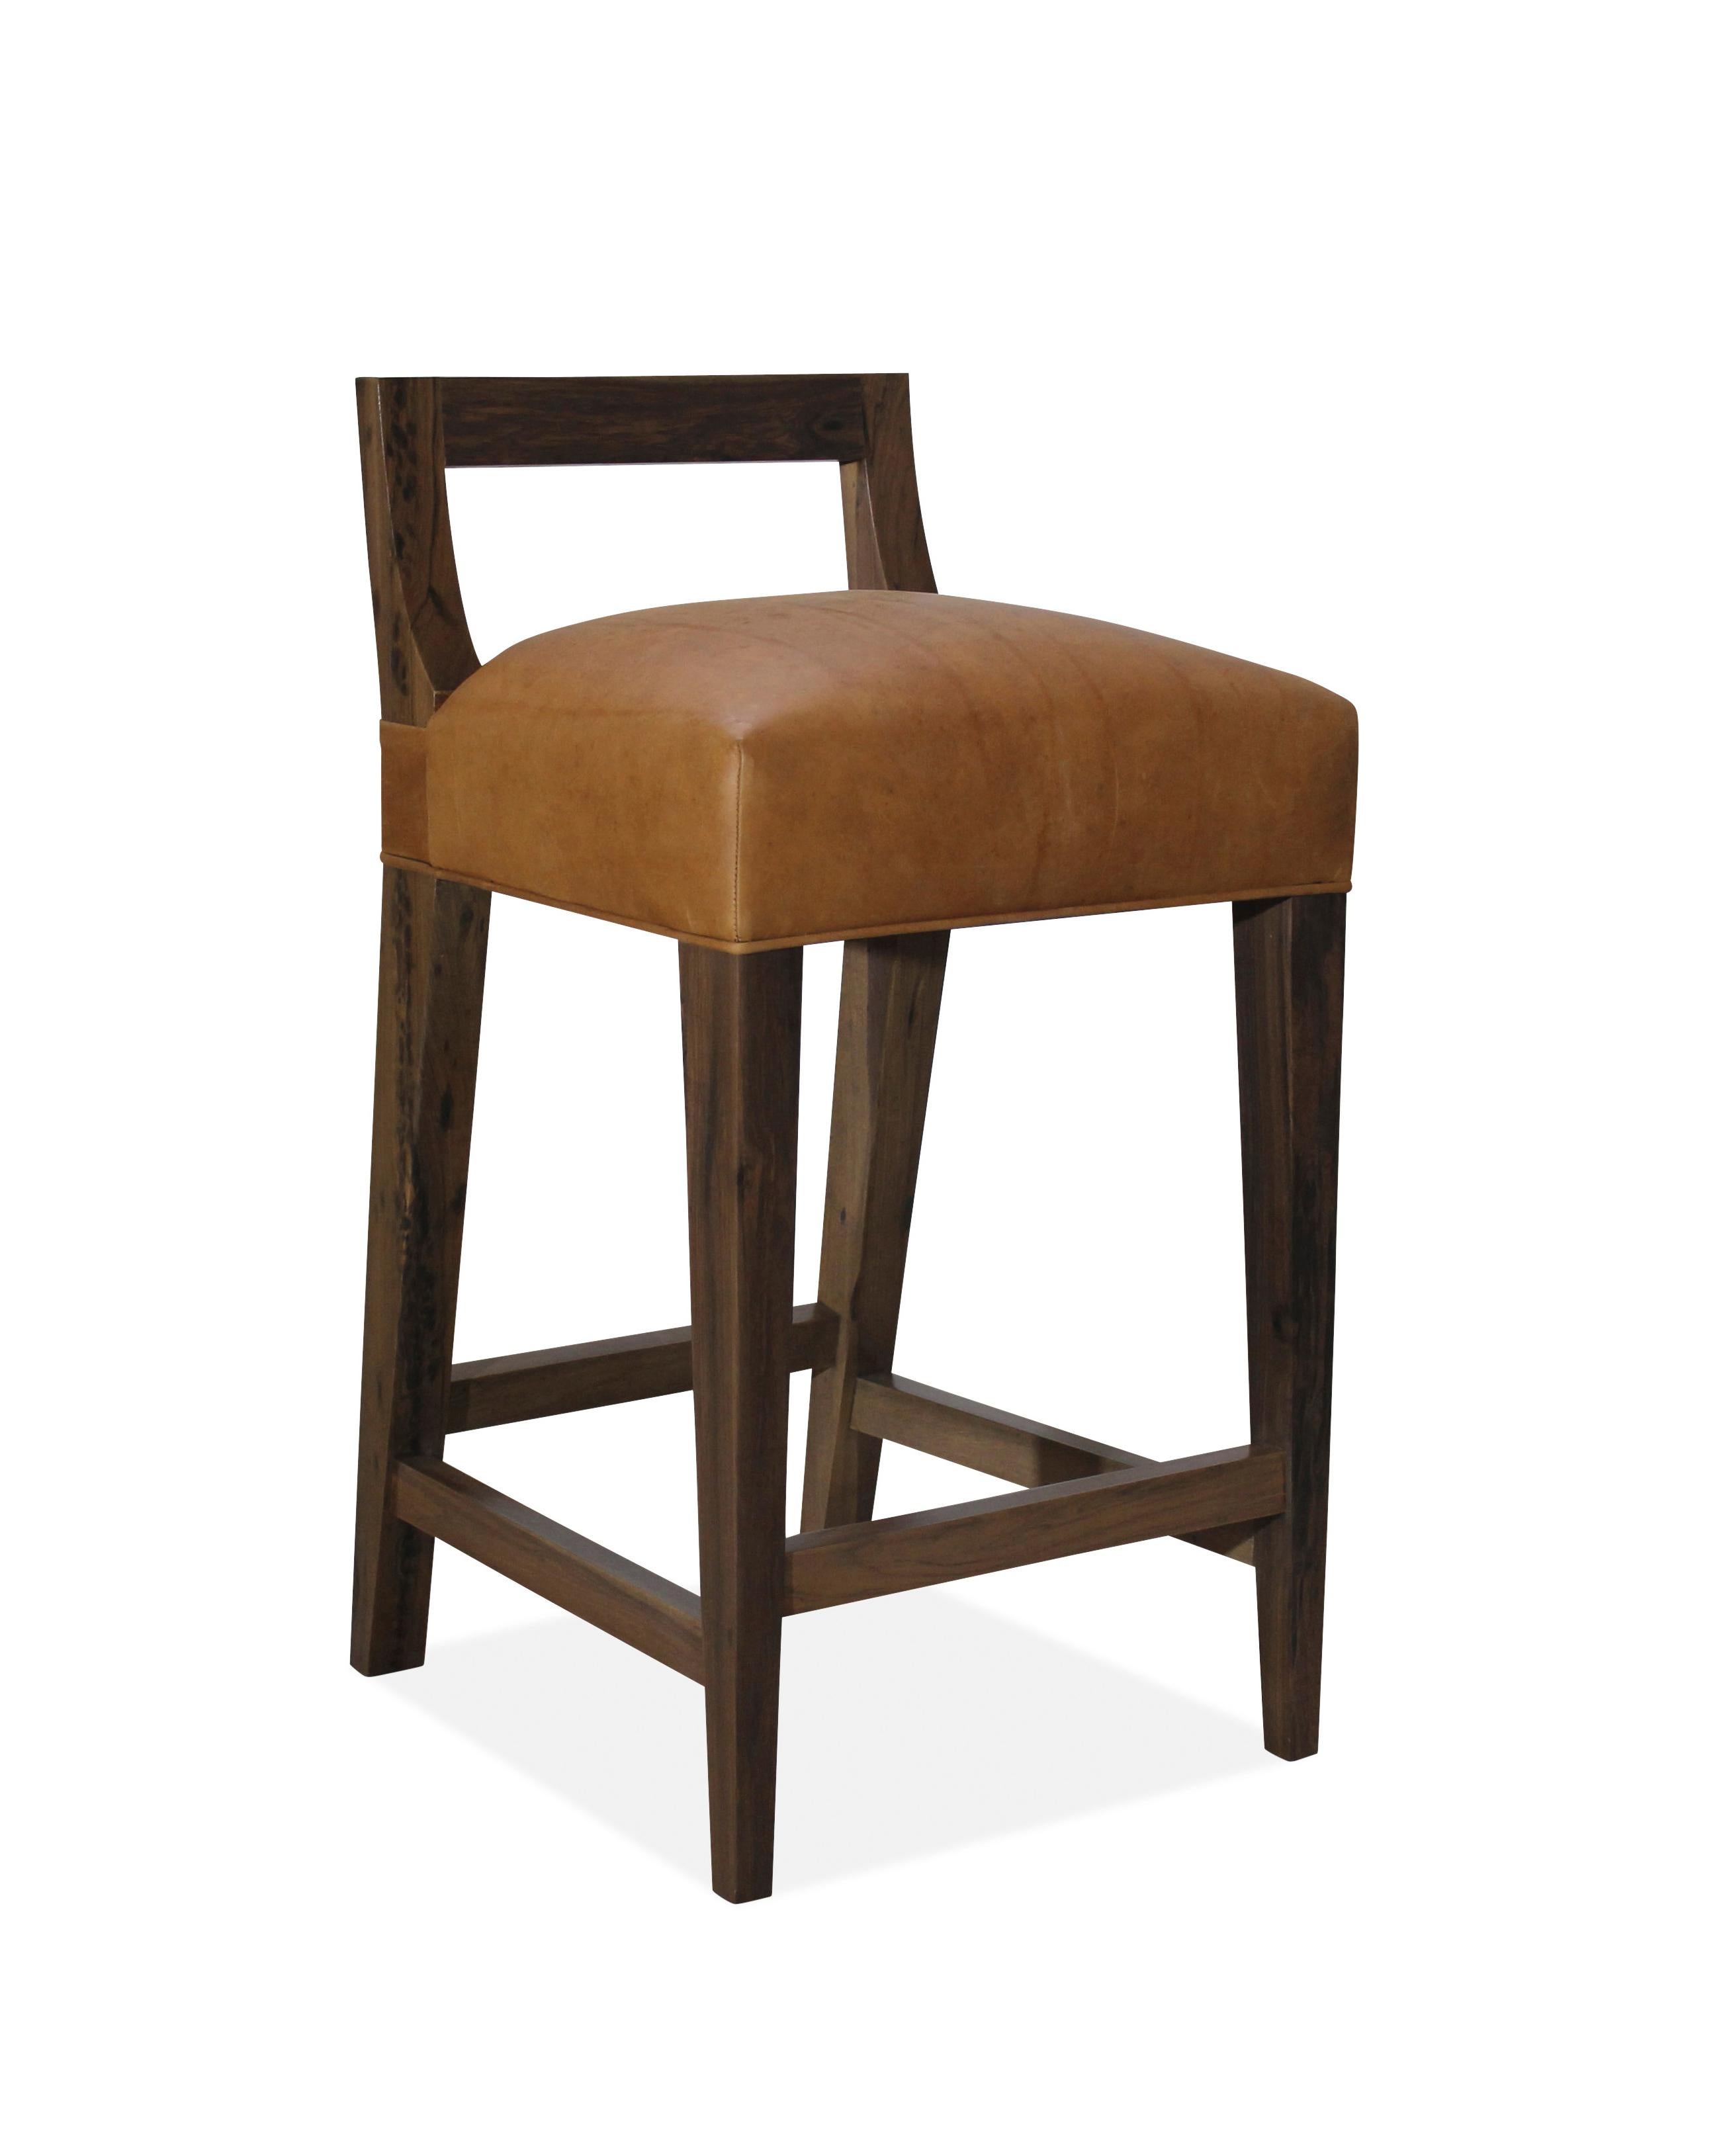 Exotic Wood Contemporary Stool in Leather from Costantini, Ecco In New Condition For Sale In New York, NY